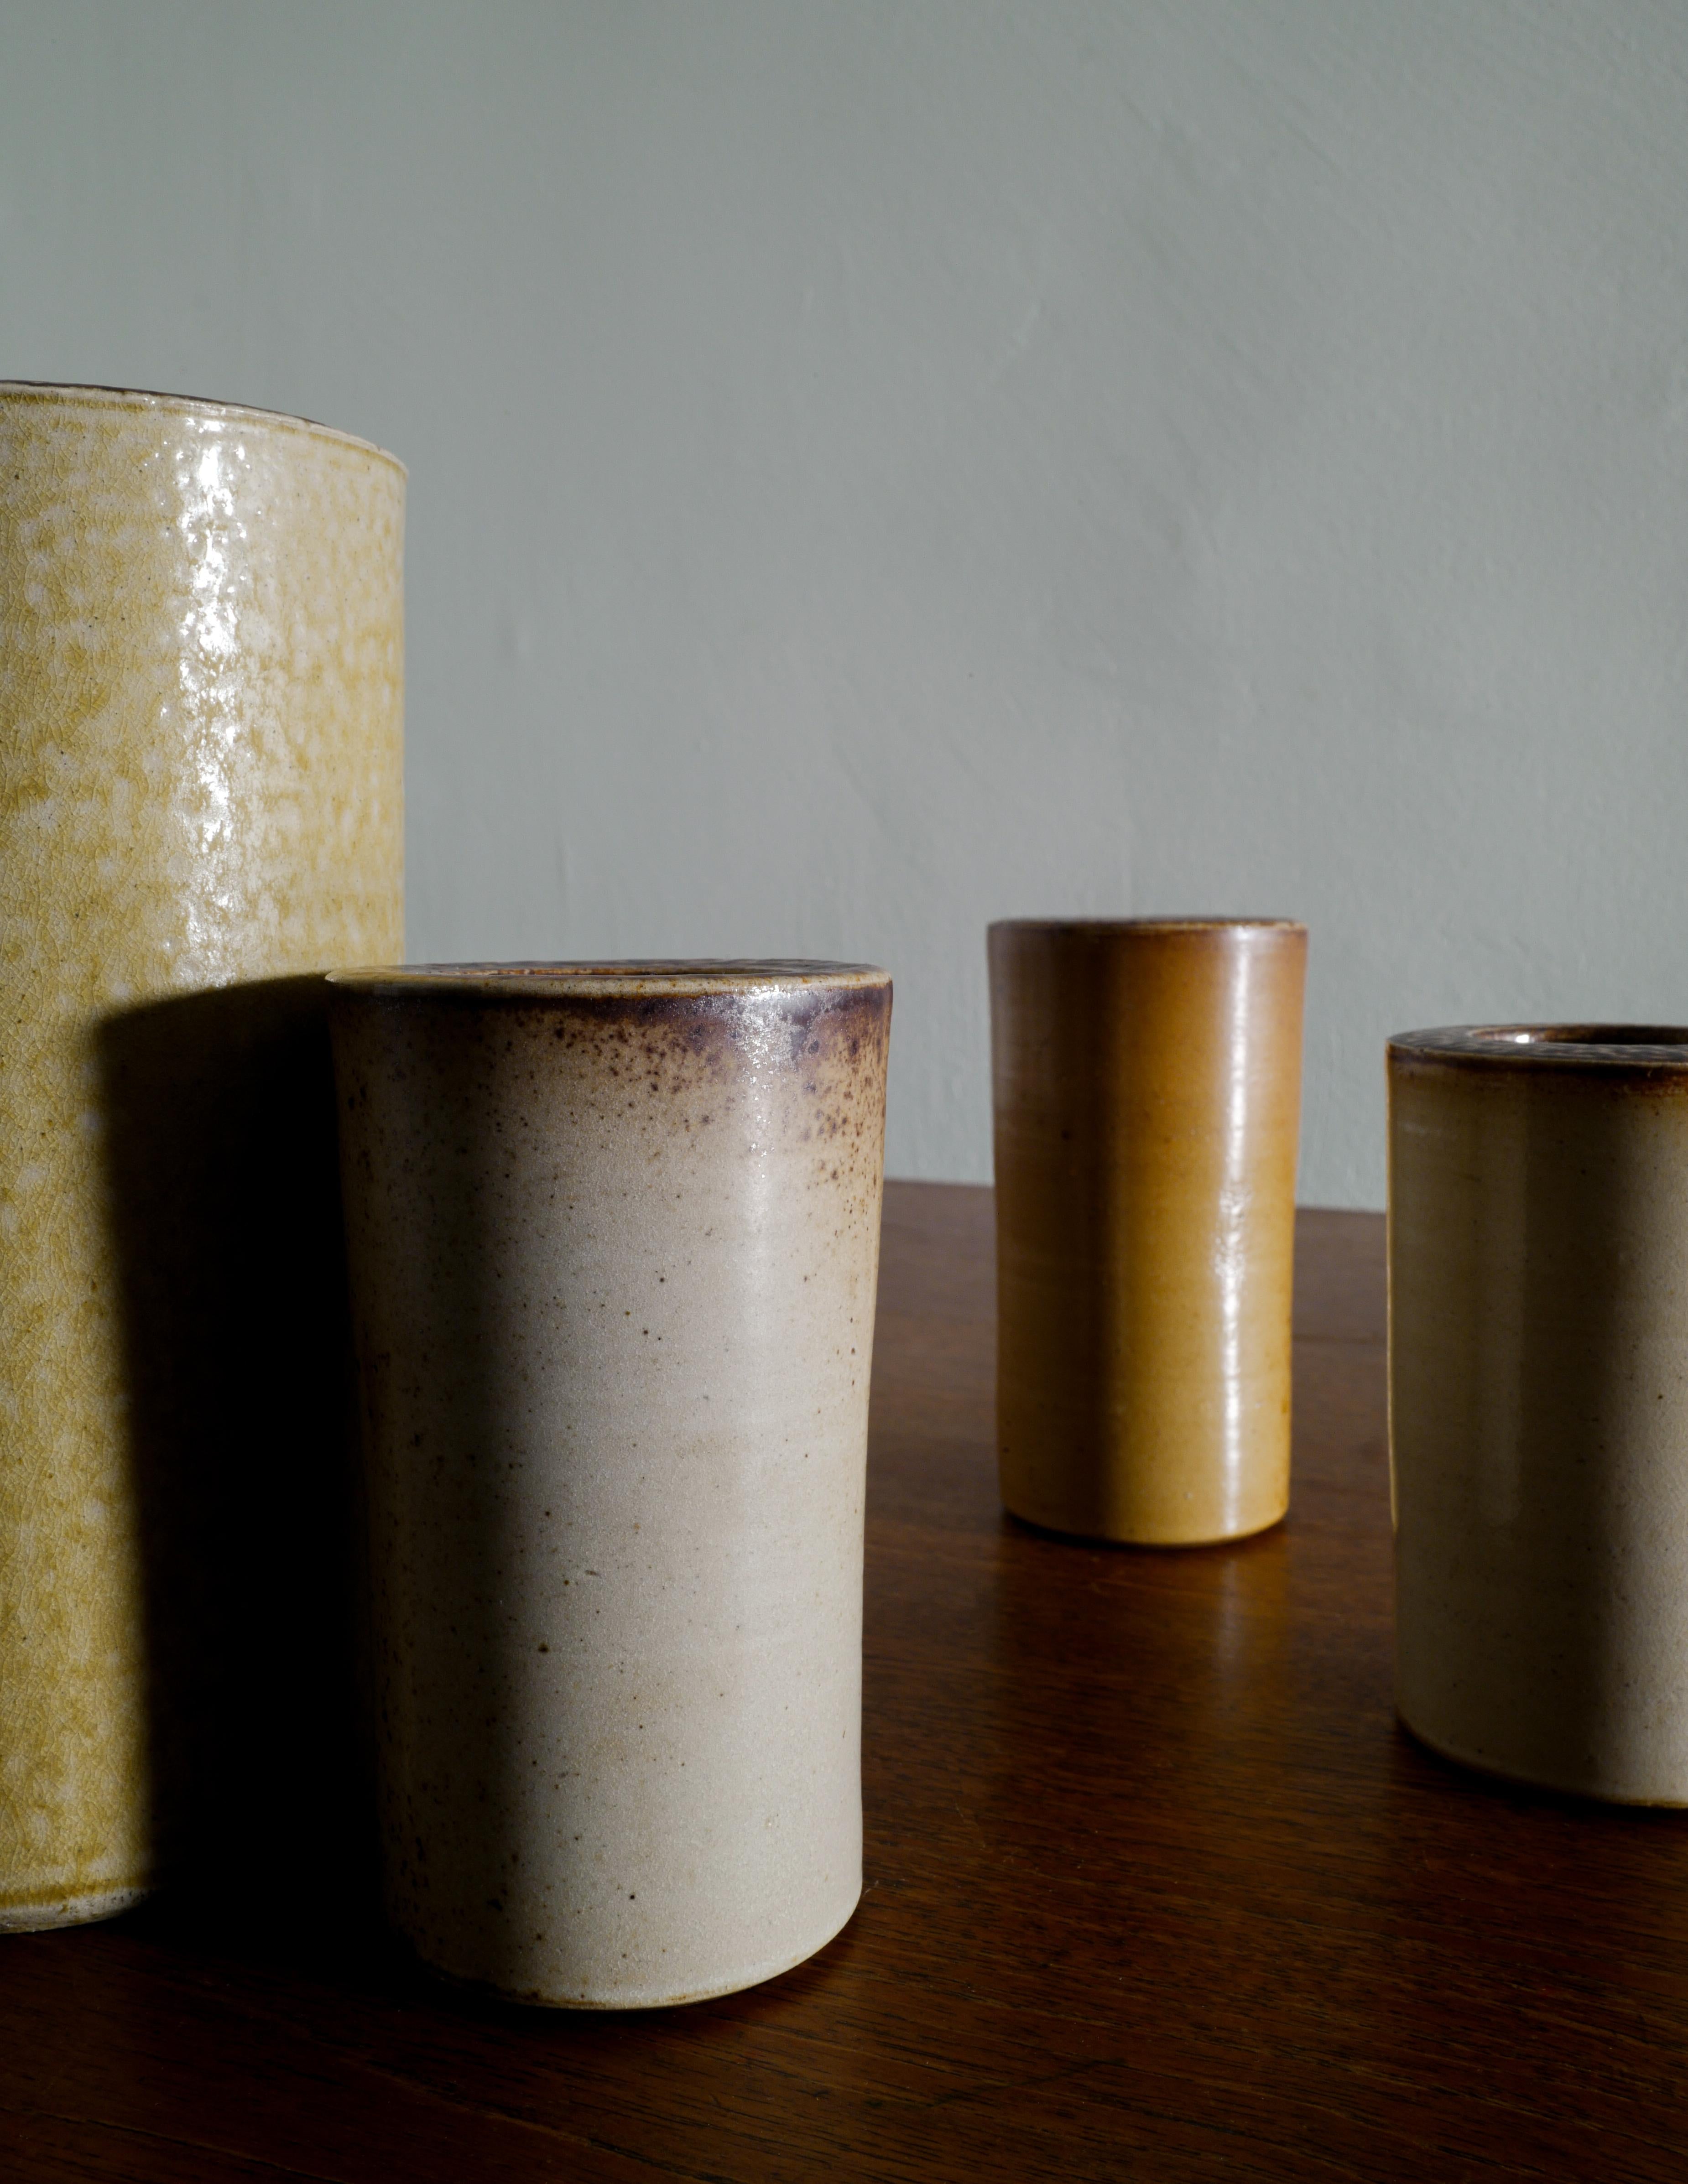 Stoneware Four Mid-Century Vases Ceramics Produced by Wallåka, Sweden, 1940s For Sale